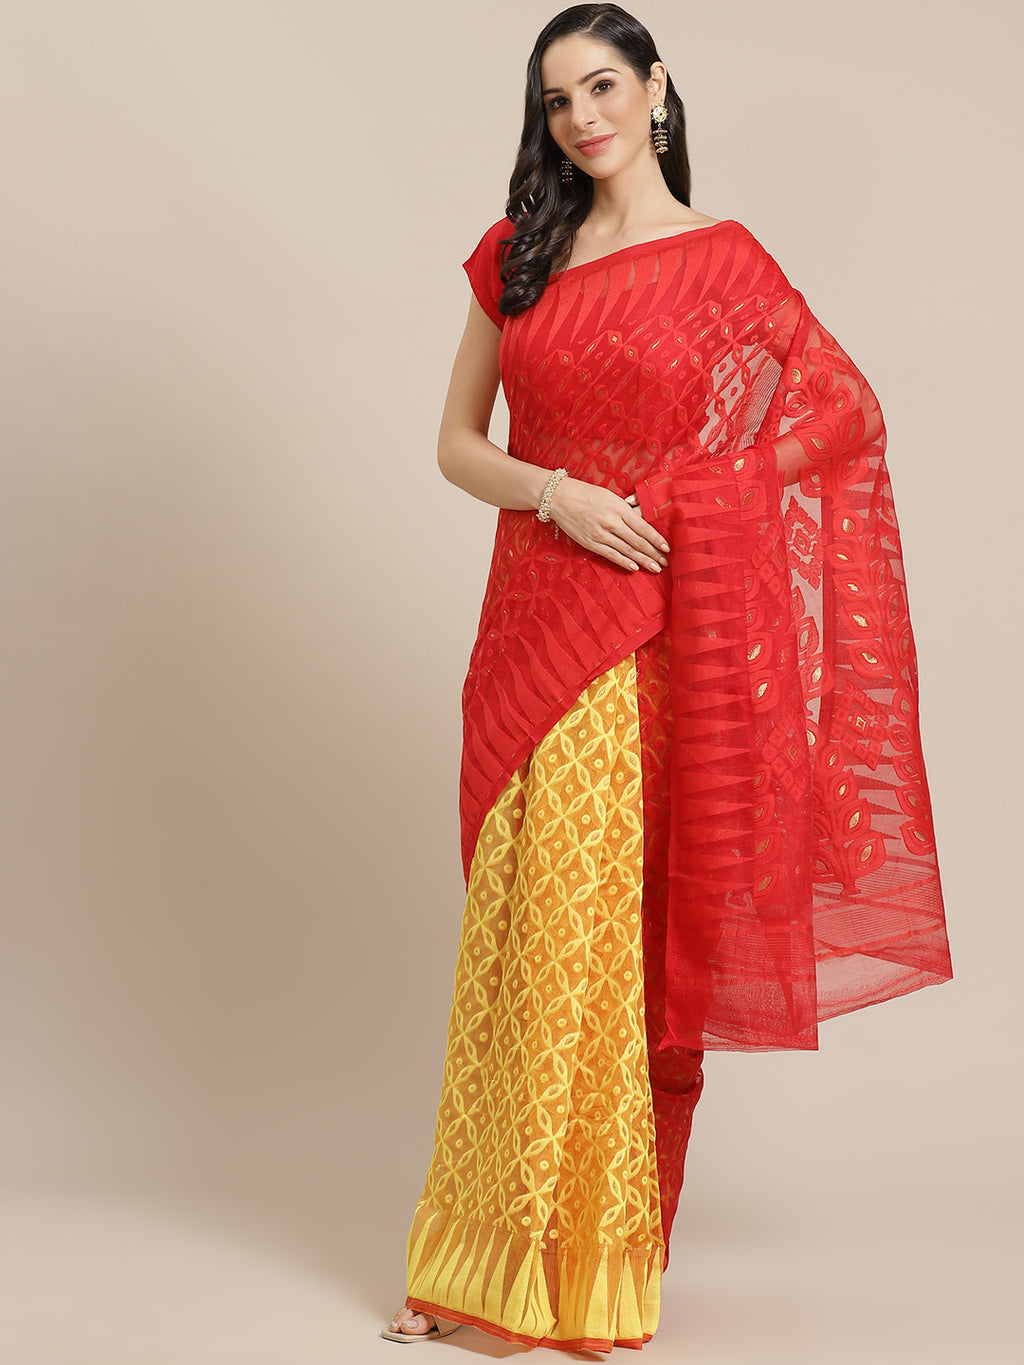 Red and Tan, Kalakari India Jamdani Silk Cotton Woven Design Saree without blouse CHBHSA0022-Saree-Kalakari India-CHBHSA0022-Bengal, Geographical Indication, Hand Crafted, Hand Painted, Heritage Prints, Jamdani, Natural Dyes, Red, Sarees, Silk Blended, Sustainable Fabrics, Woven, Yellow-[Linen,Ethnic,wear,Fashionista,Handloom,Handicraft,Indigo,blockprint,block,print,Cotton,Chanderi,Blue, latest,classy,party,bollywood,trendy,summer,style,traditional,formal,elegant,unique,style,hand,block,print, d